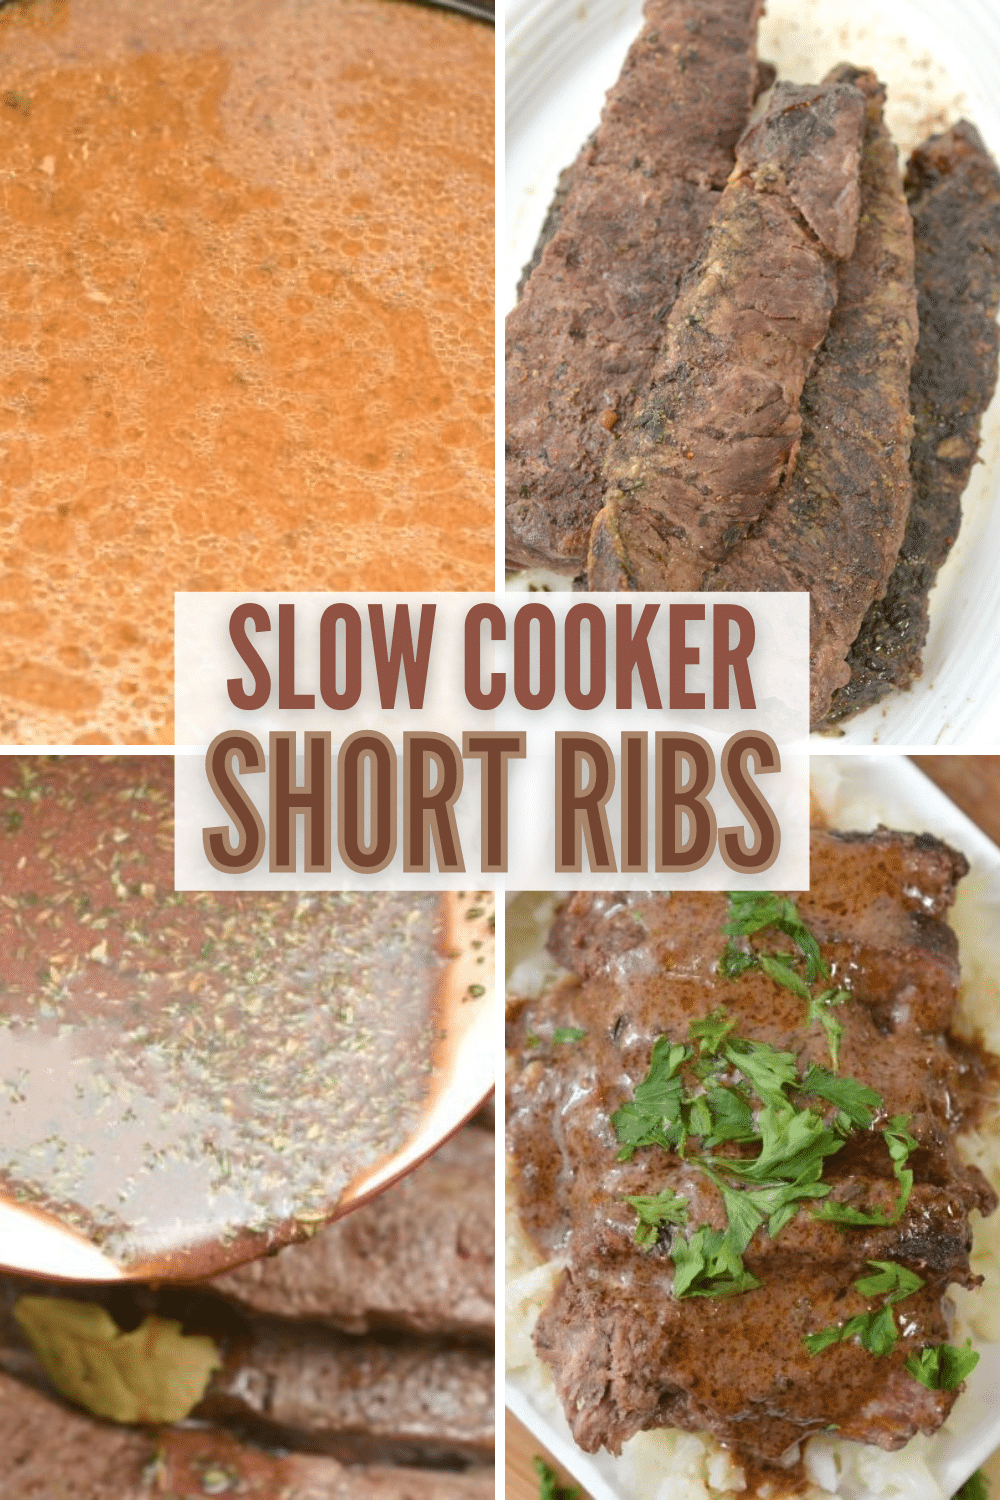 Slow Cooker Short Ribs make dinner a breeze. This easy short ribs recipe will have your family asking for seconds again and again. #slowcooker #ribs #shortribs via @wondermomwannab